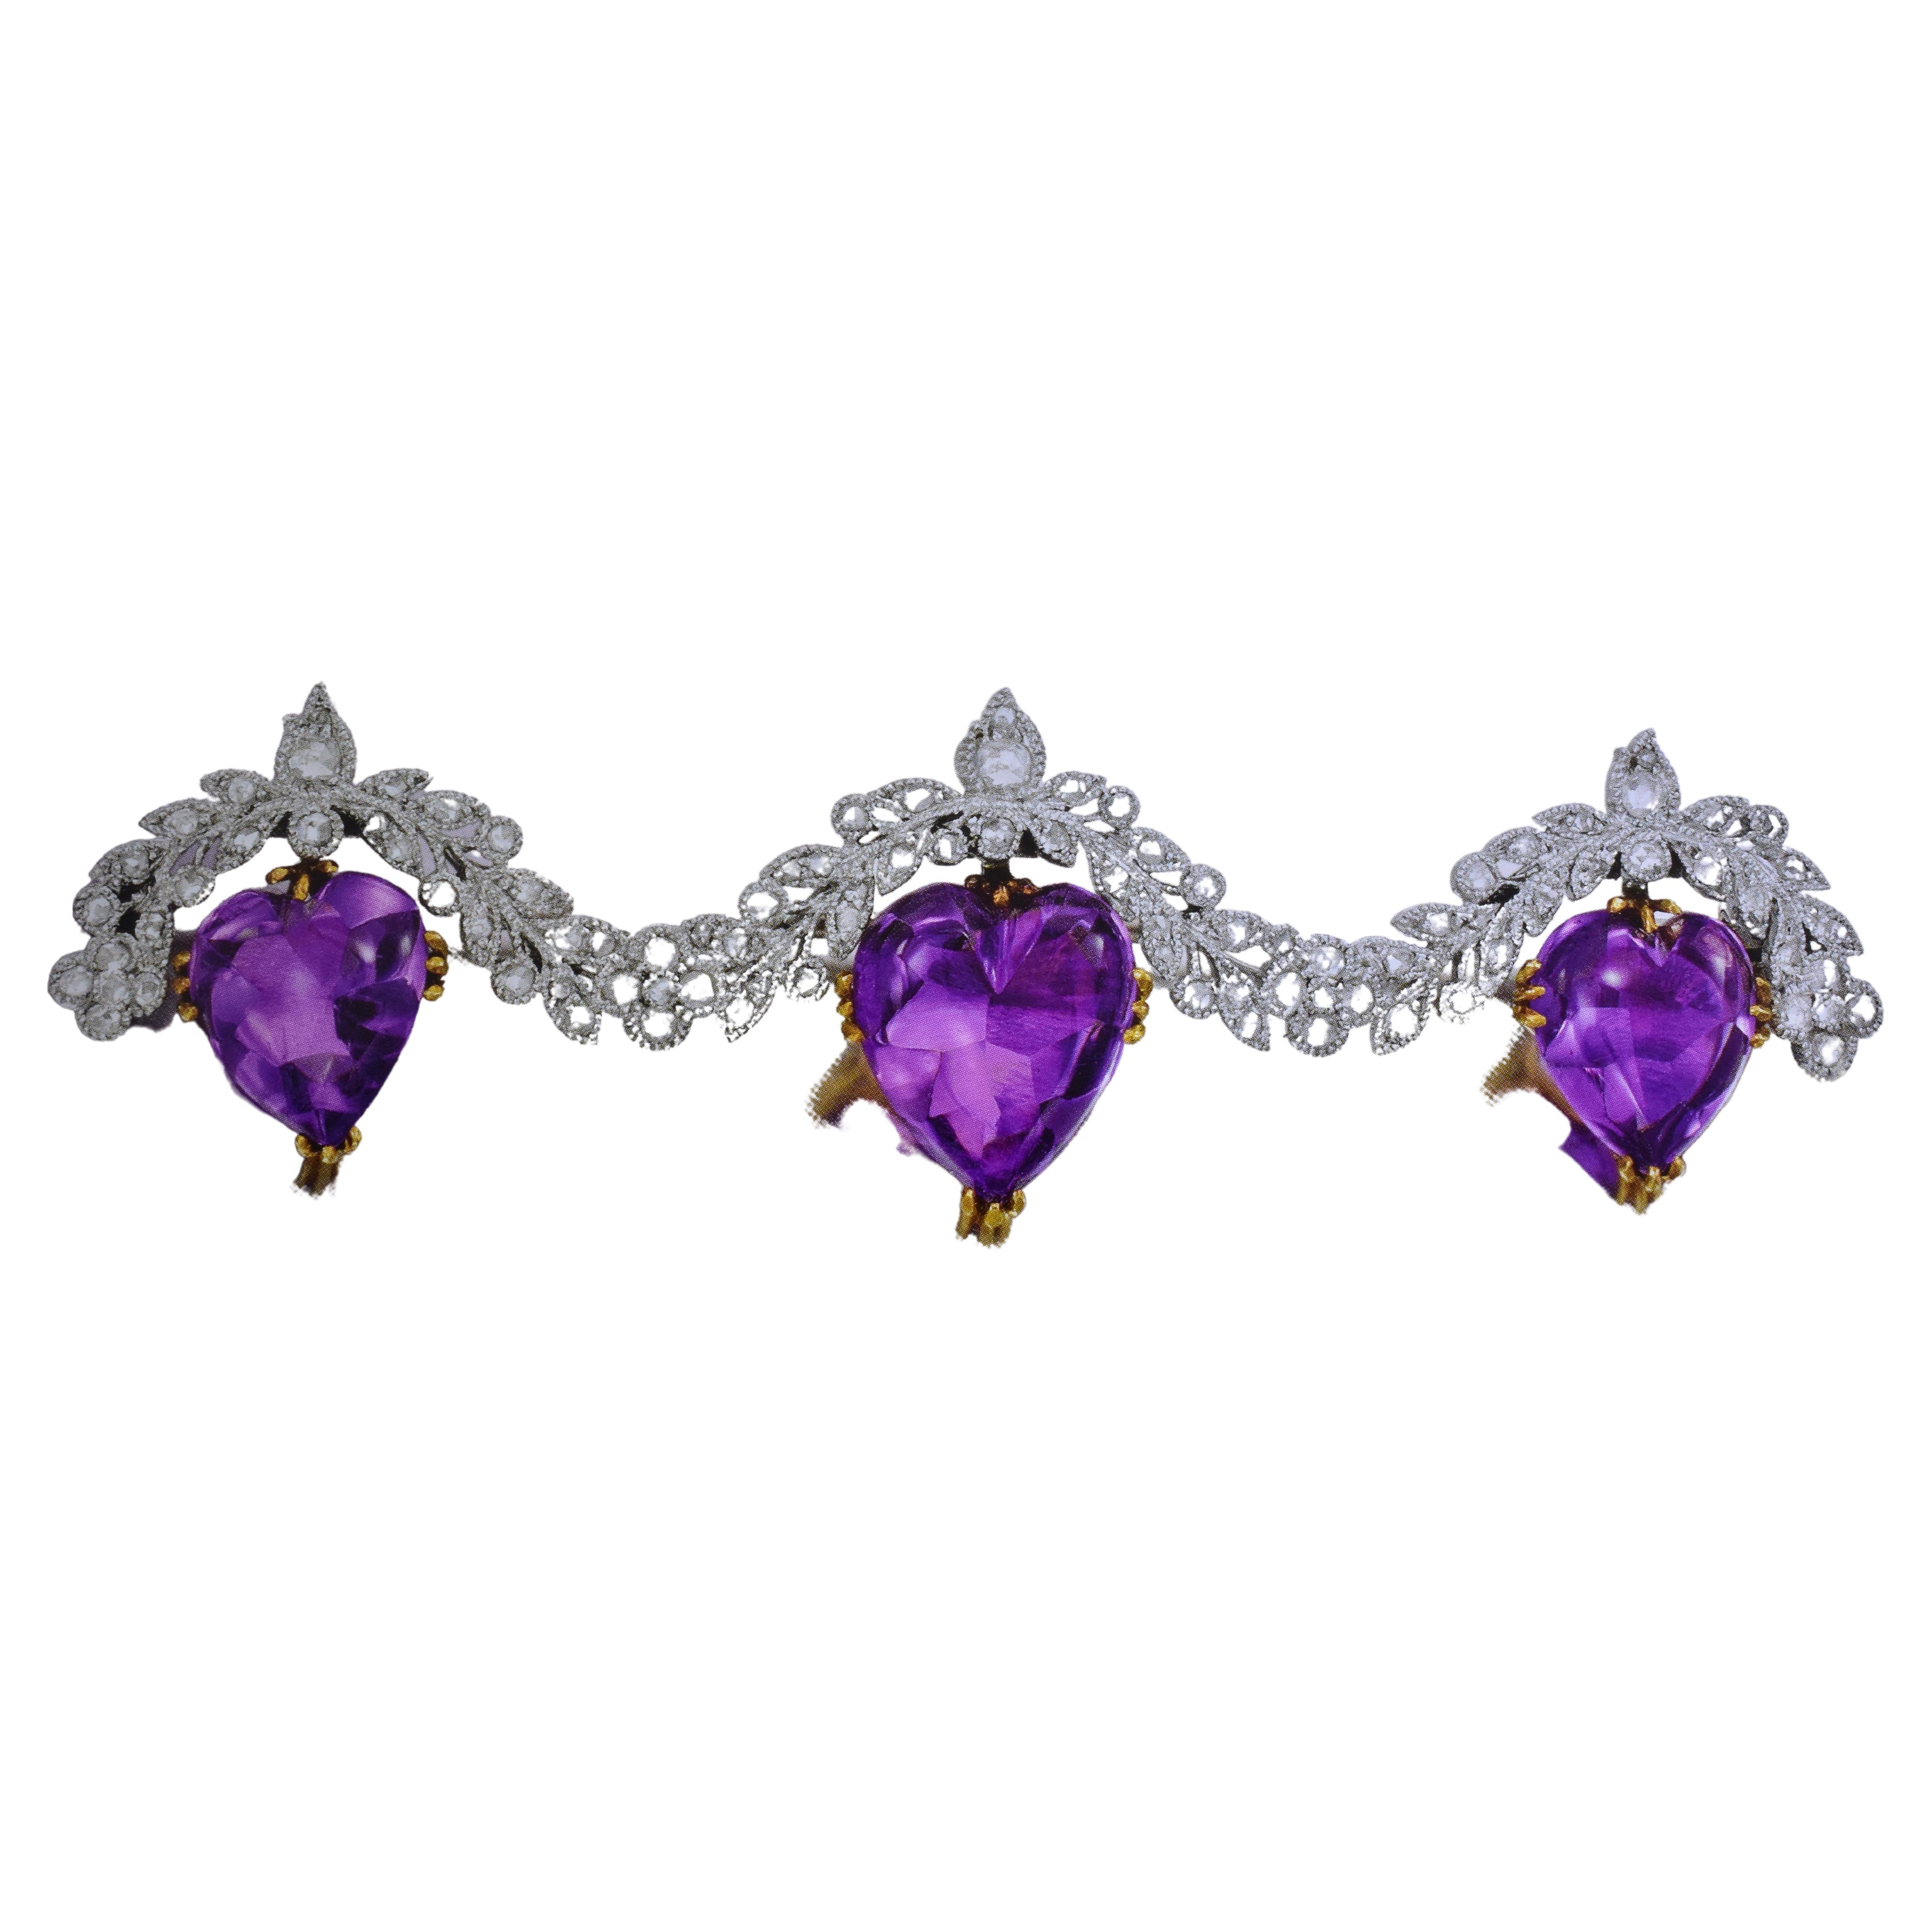 Antique heart shaped, buff-topped natural amethysts are suspended from a platinum and rose cut diamond garland.  The natural 3 amethysts are prong set in 18k yellow gold.  The platinum and diamond garland is well done exhibiting fine early 20th